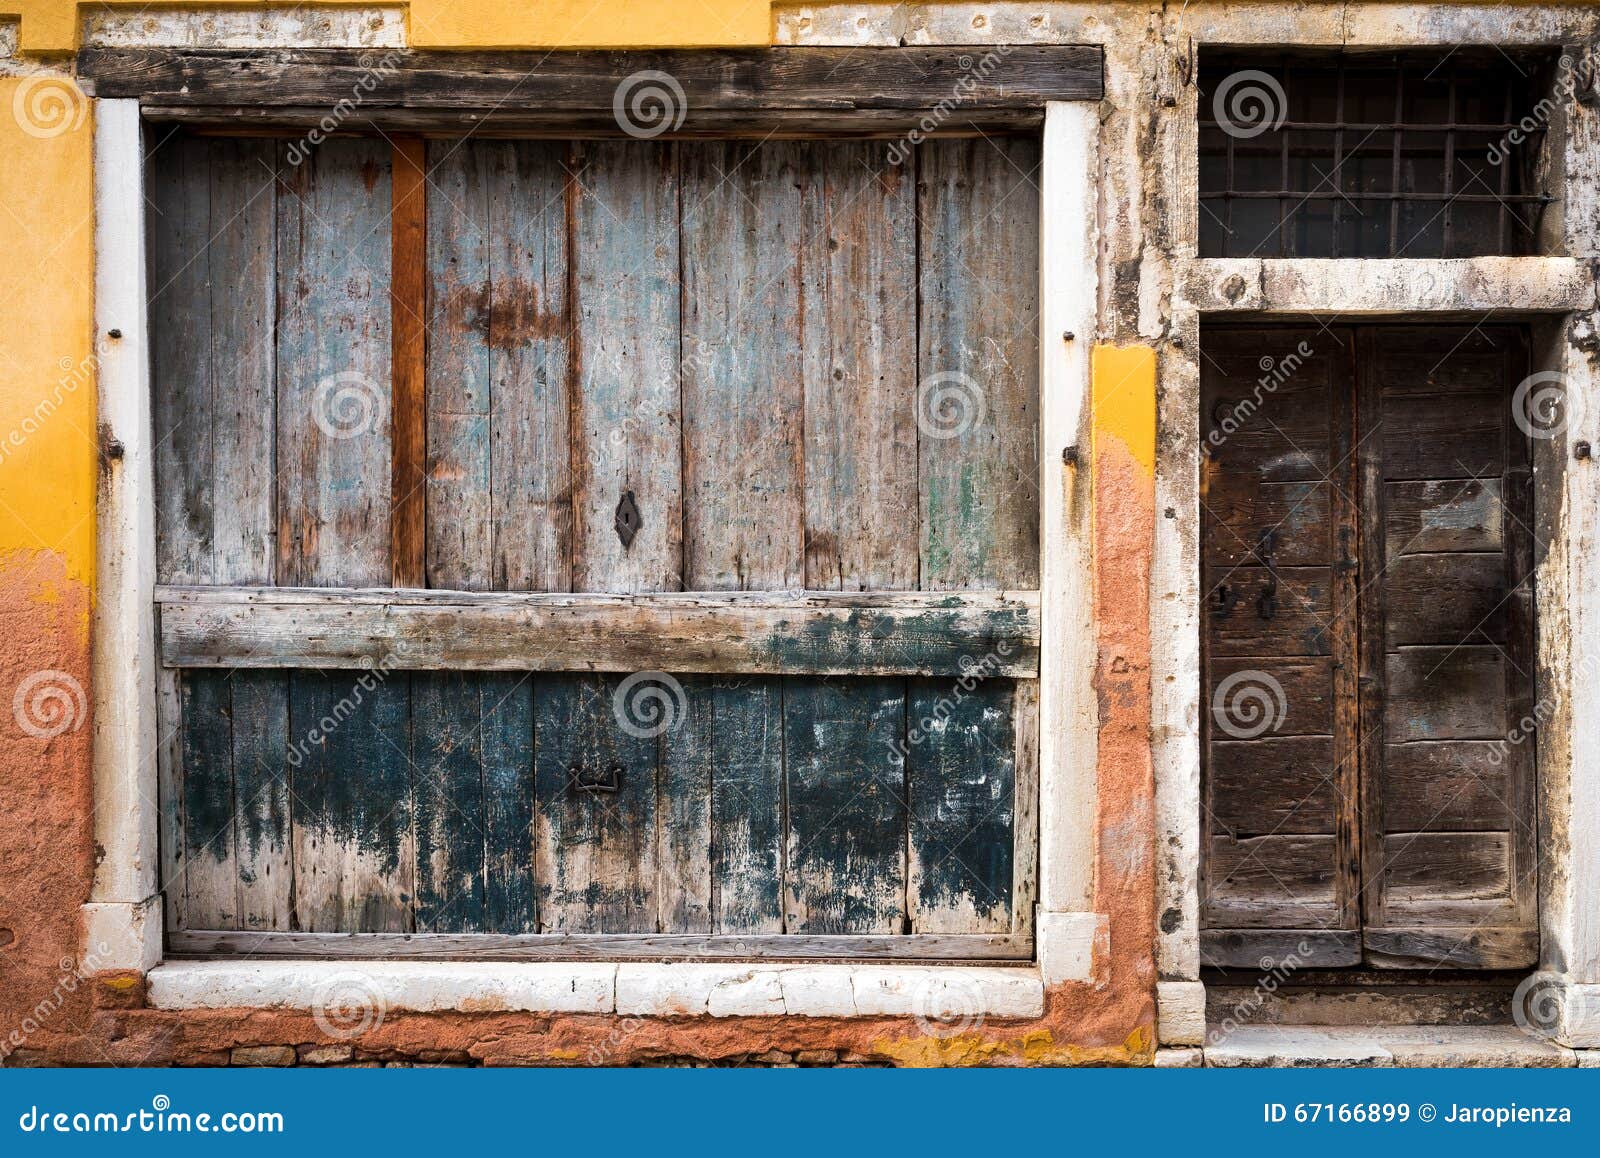 Old Vintage Door Window And Wall In Venice Italy Stock